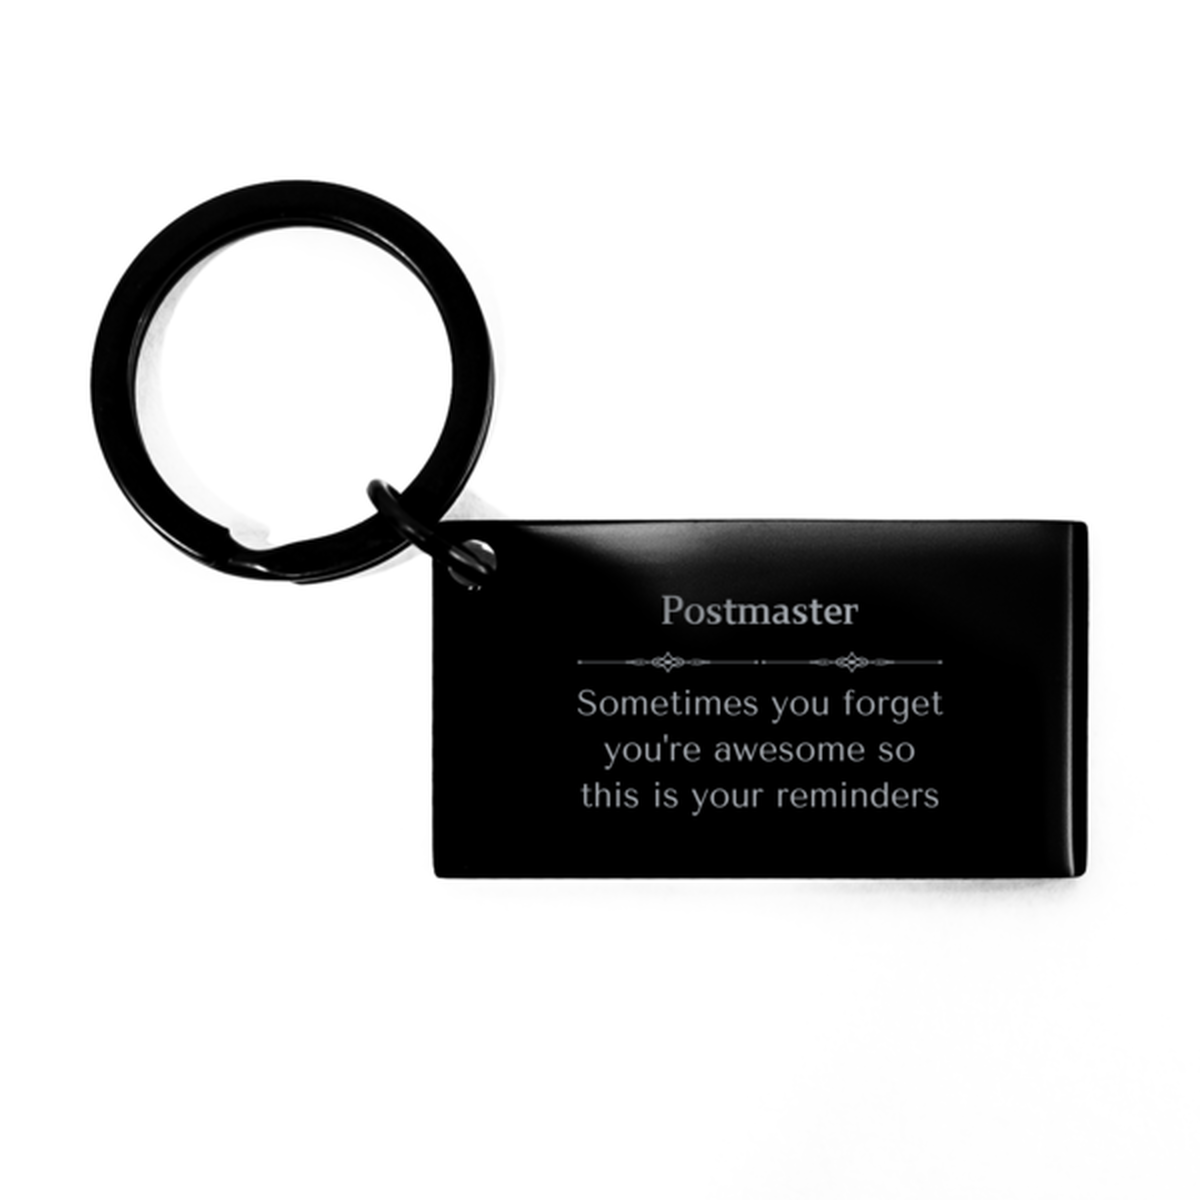 Sentimental Postmaster Keychain, Senator Sometimes you forget you're awesome so this is your reminders, Graduation Christmas Birthday Gifts for Postmaster, Men, Women, Coworkers